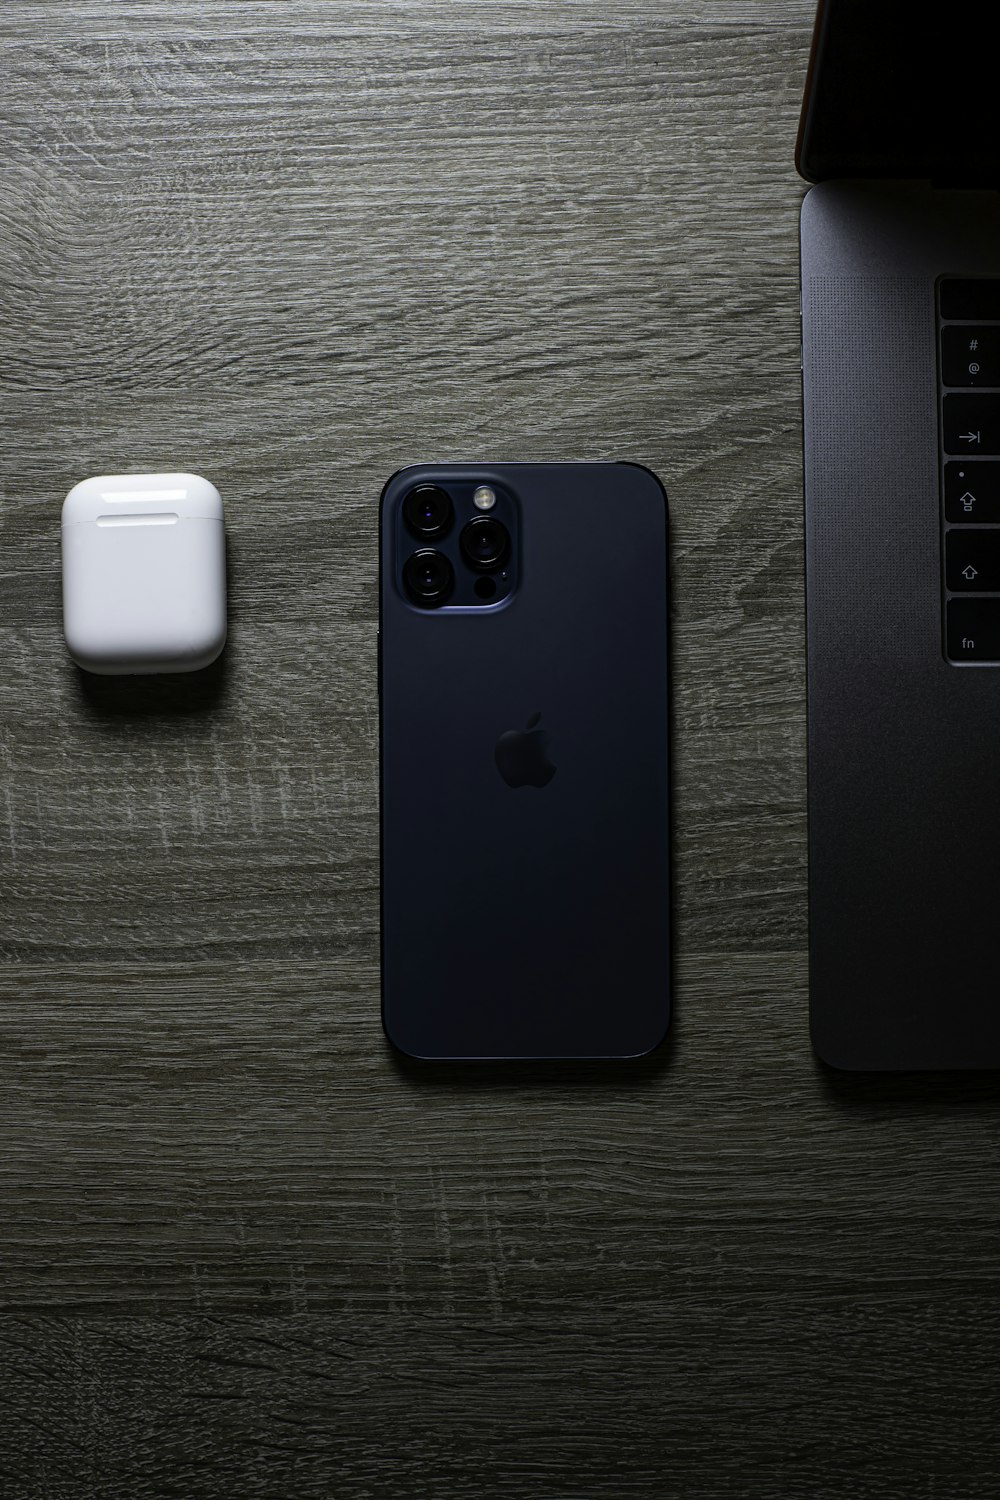 blue iphone case beside white apple airpods charging case